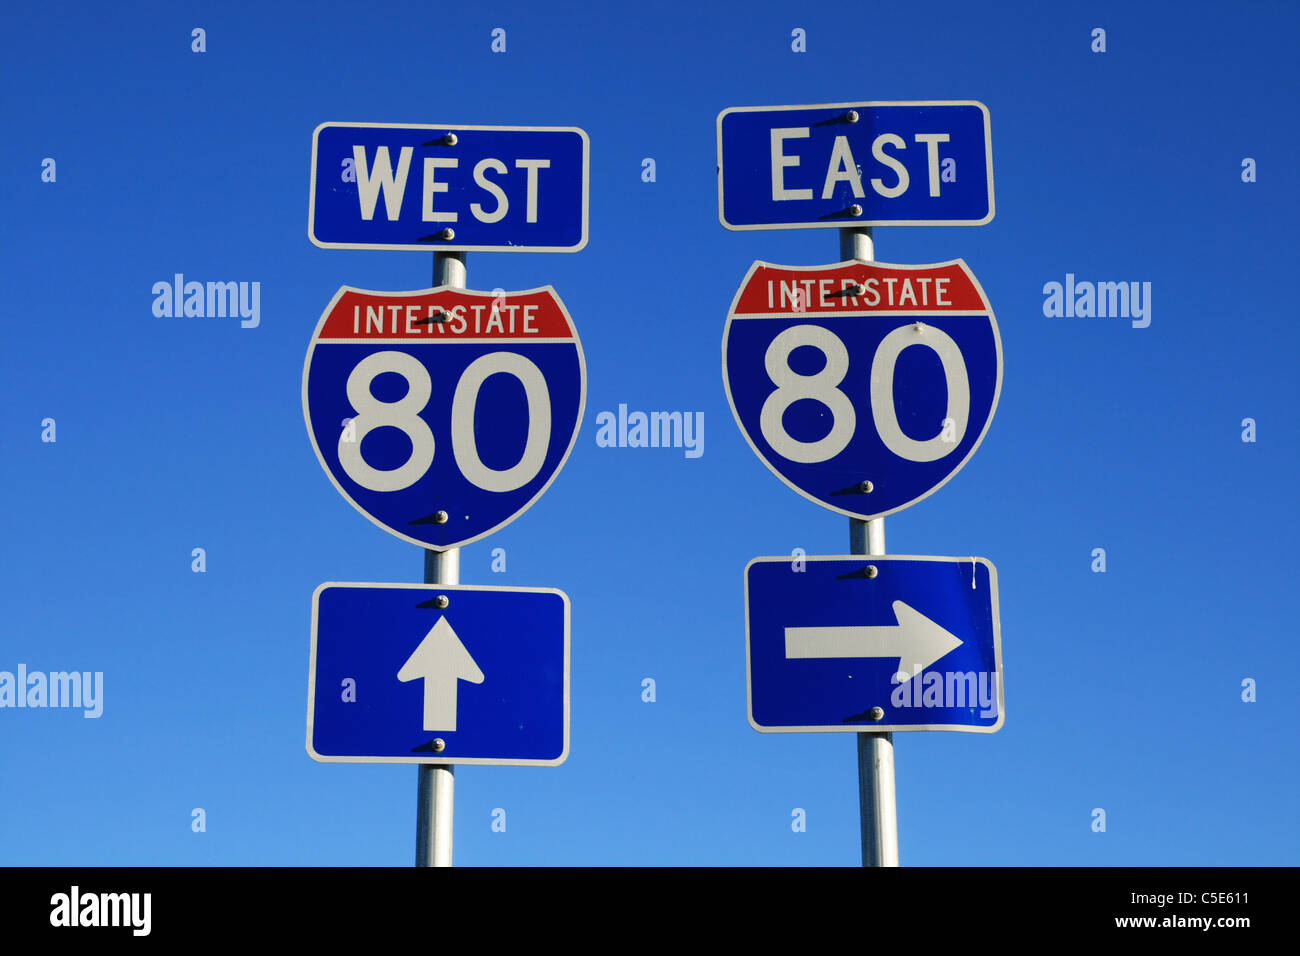 road signs for interstate 80 east and west with blue sky background Stock Photo